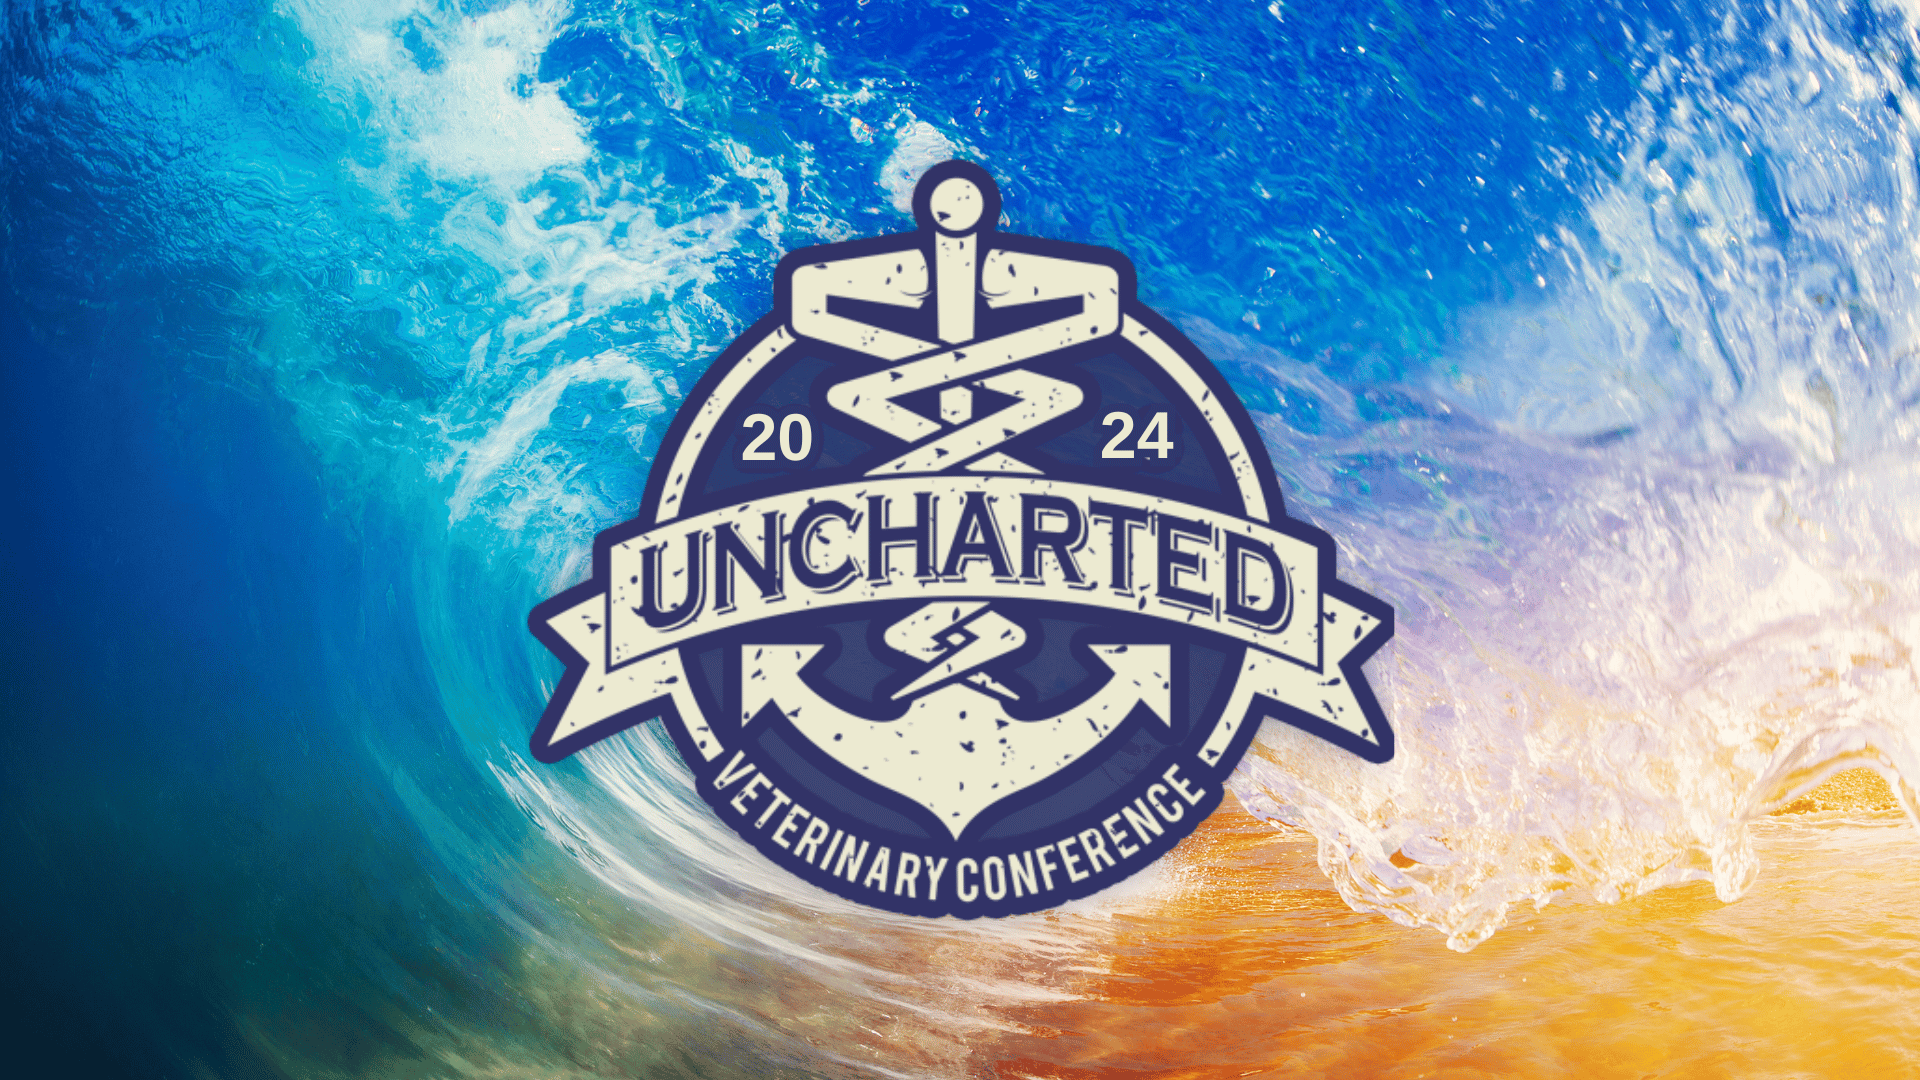 Uncharted veterinary conference 2024 logo image in front of a photo of a wave